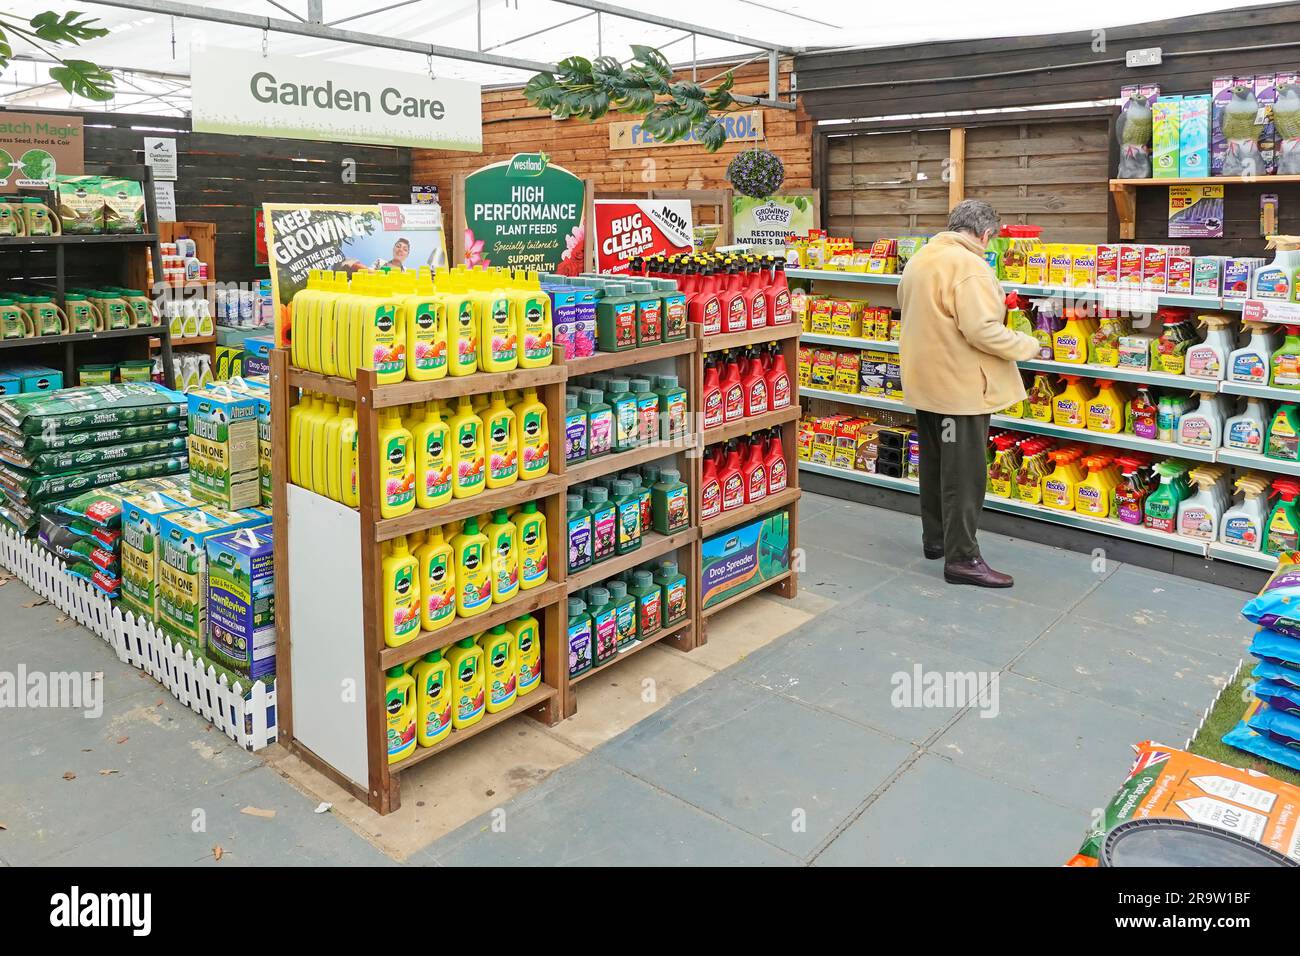 Mature woman gardener selecting hand held weed control spray on chemical at Garden Care shelves at horticulture gardening nursery business England UK Stock Photo